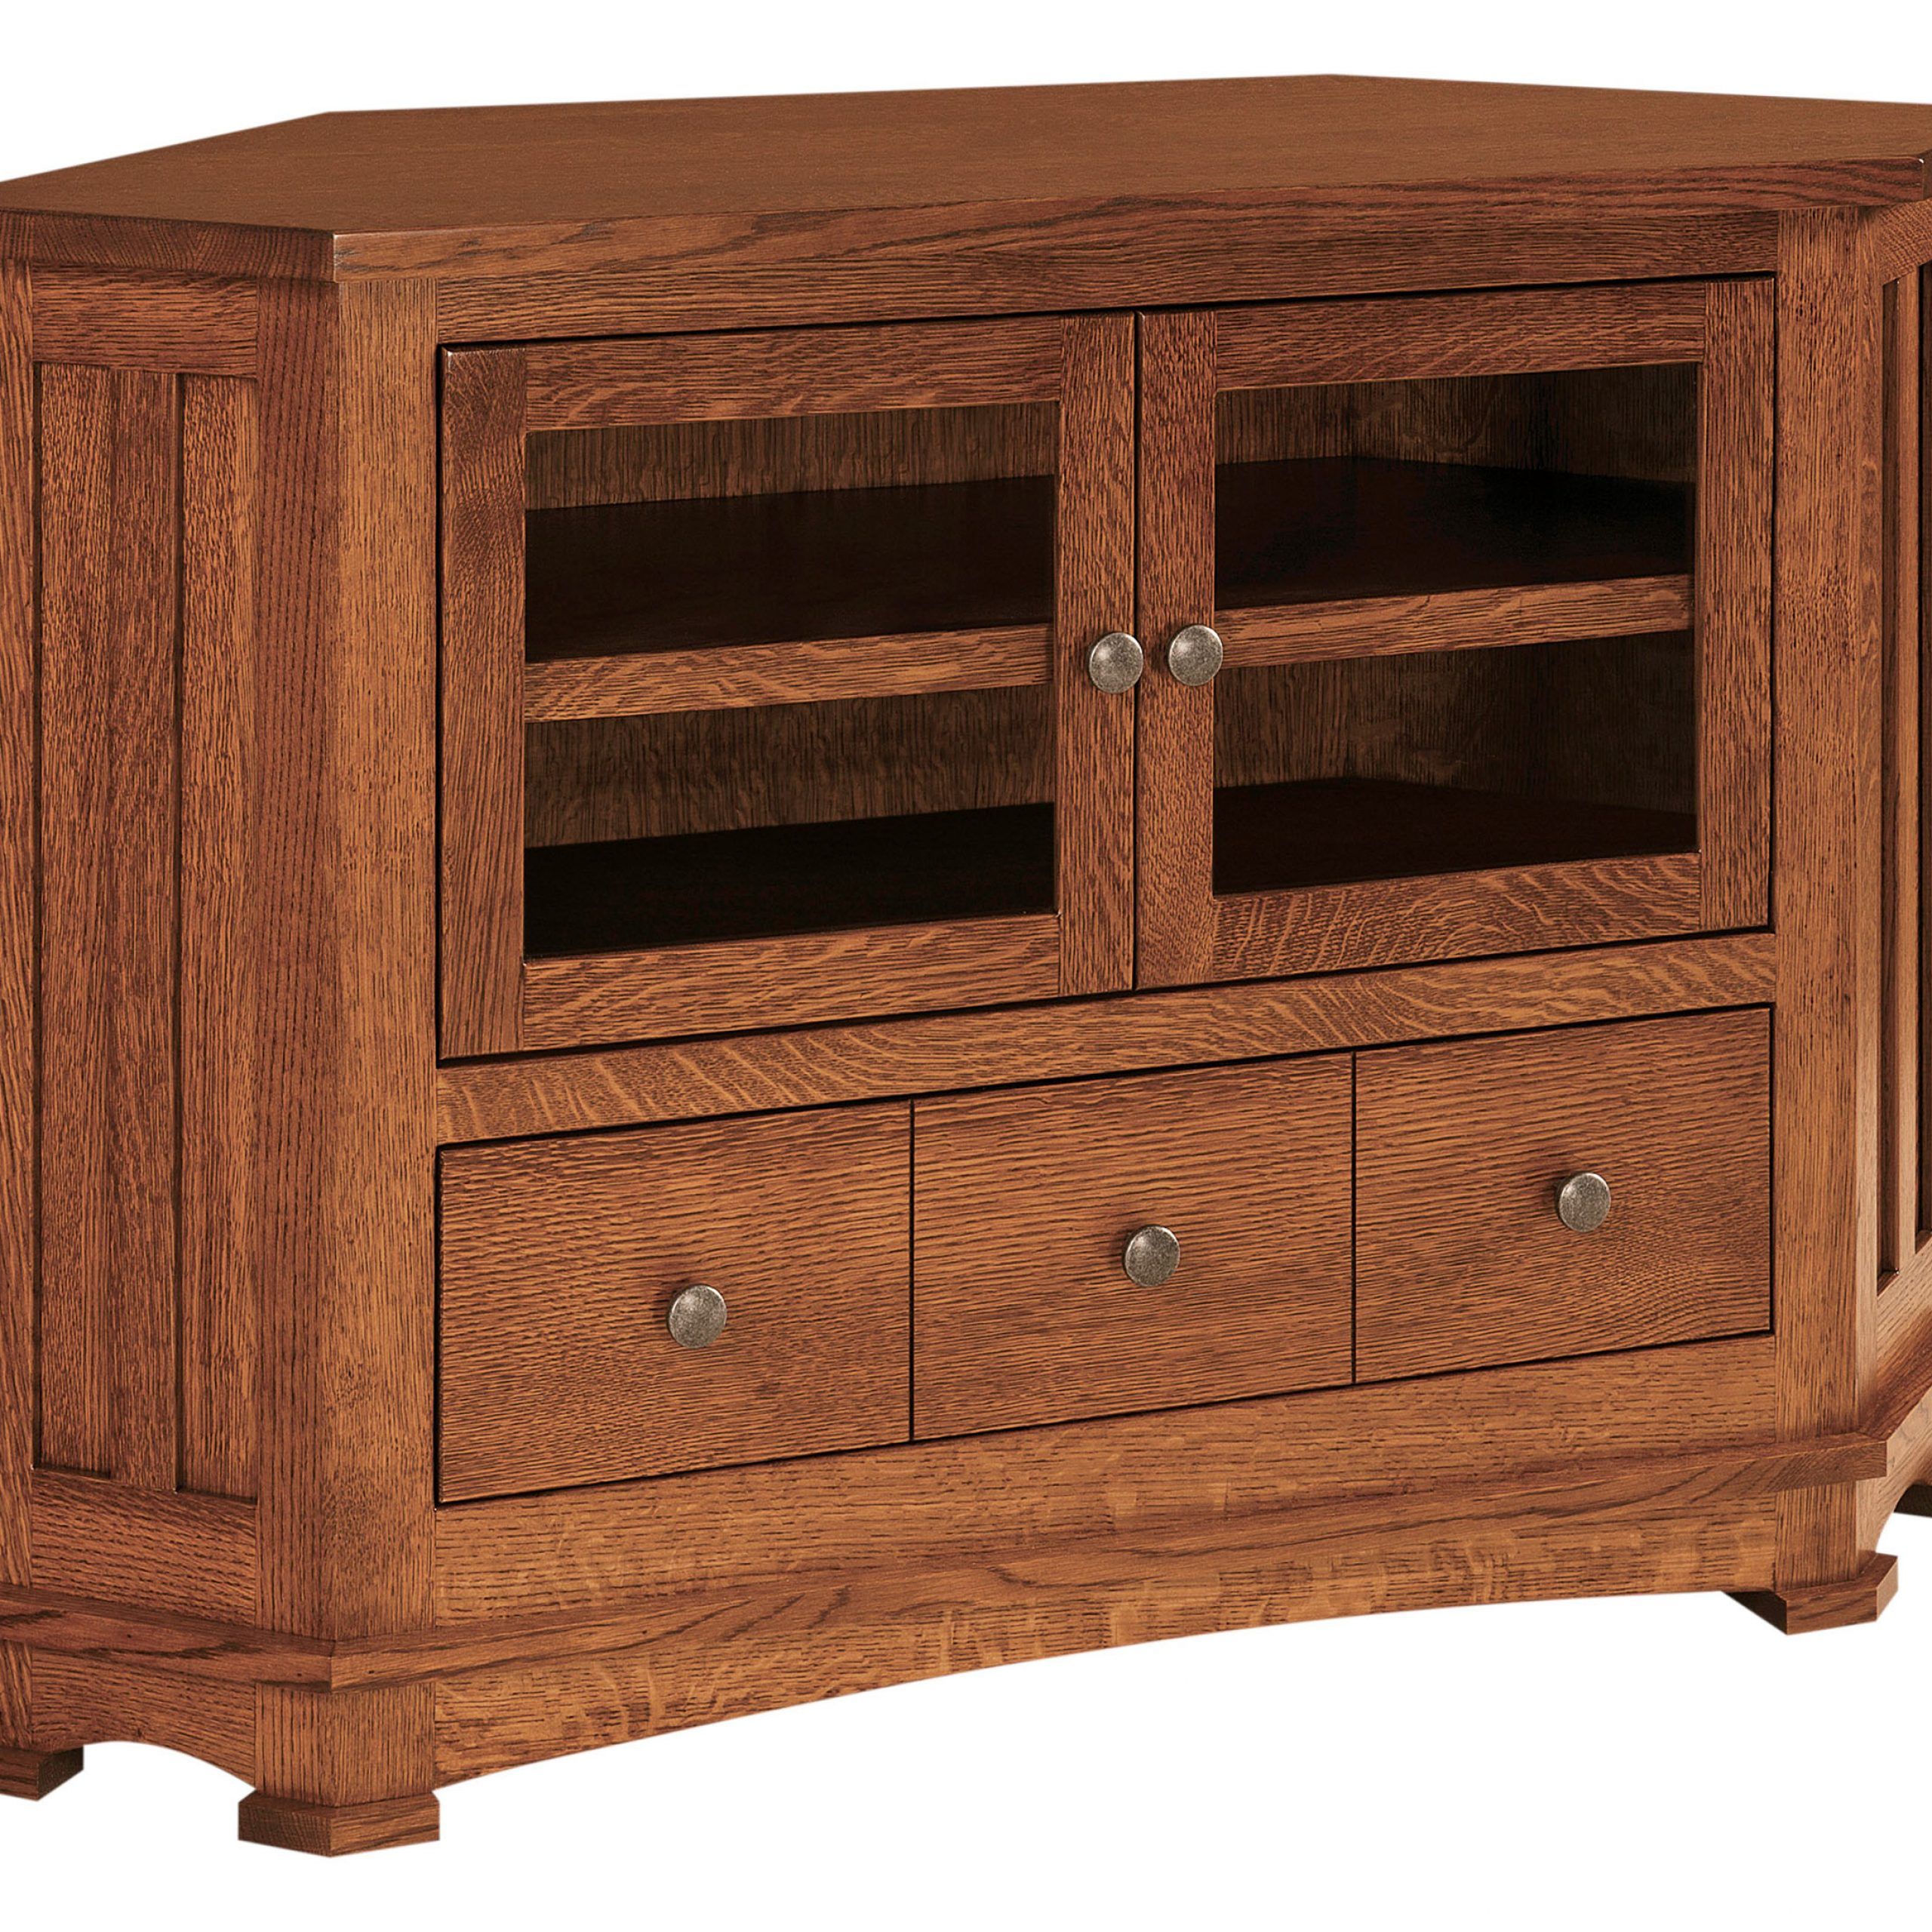 Kenwood Small Corner Tv Stand | Amish Kenwood Small Corner Pertaining To Small Tv Tables (View 15 of 15)